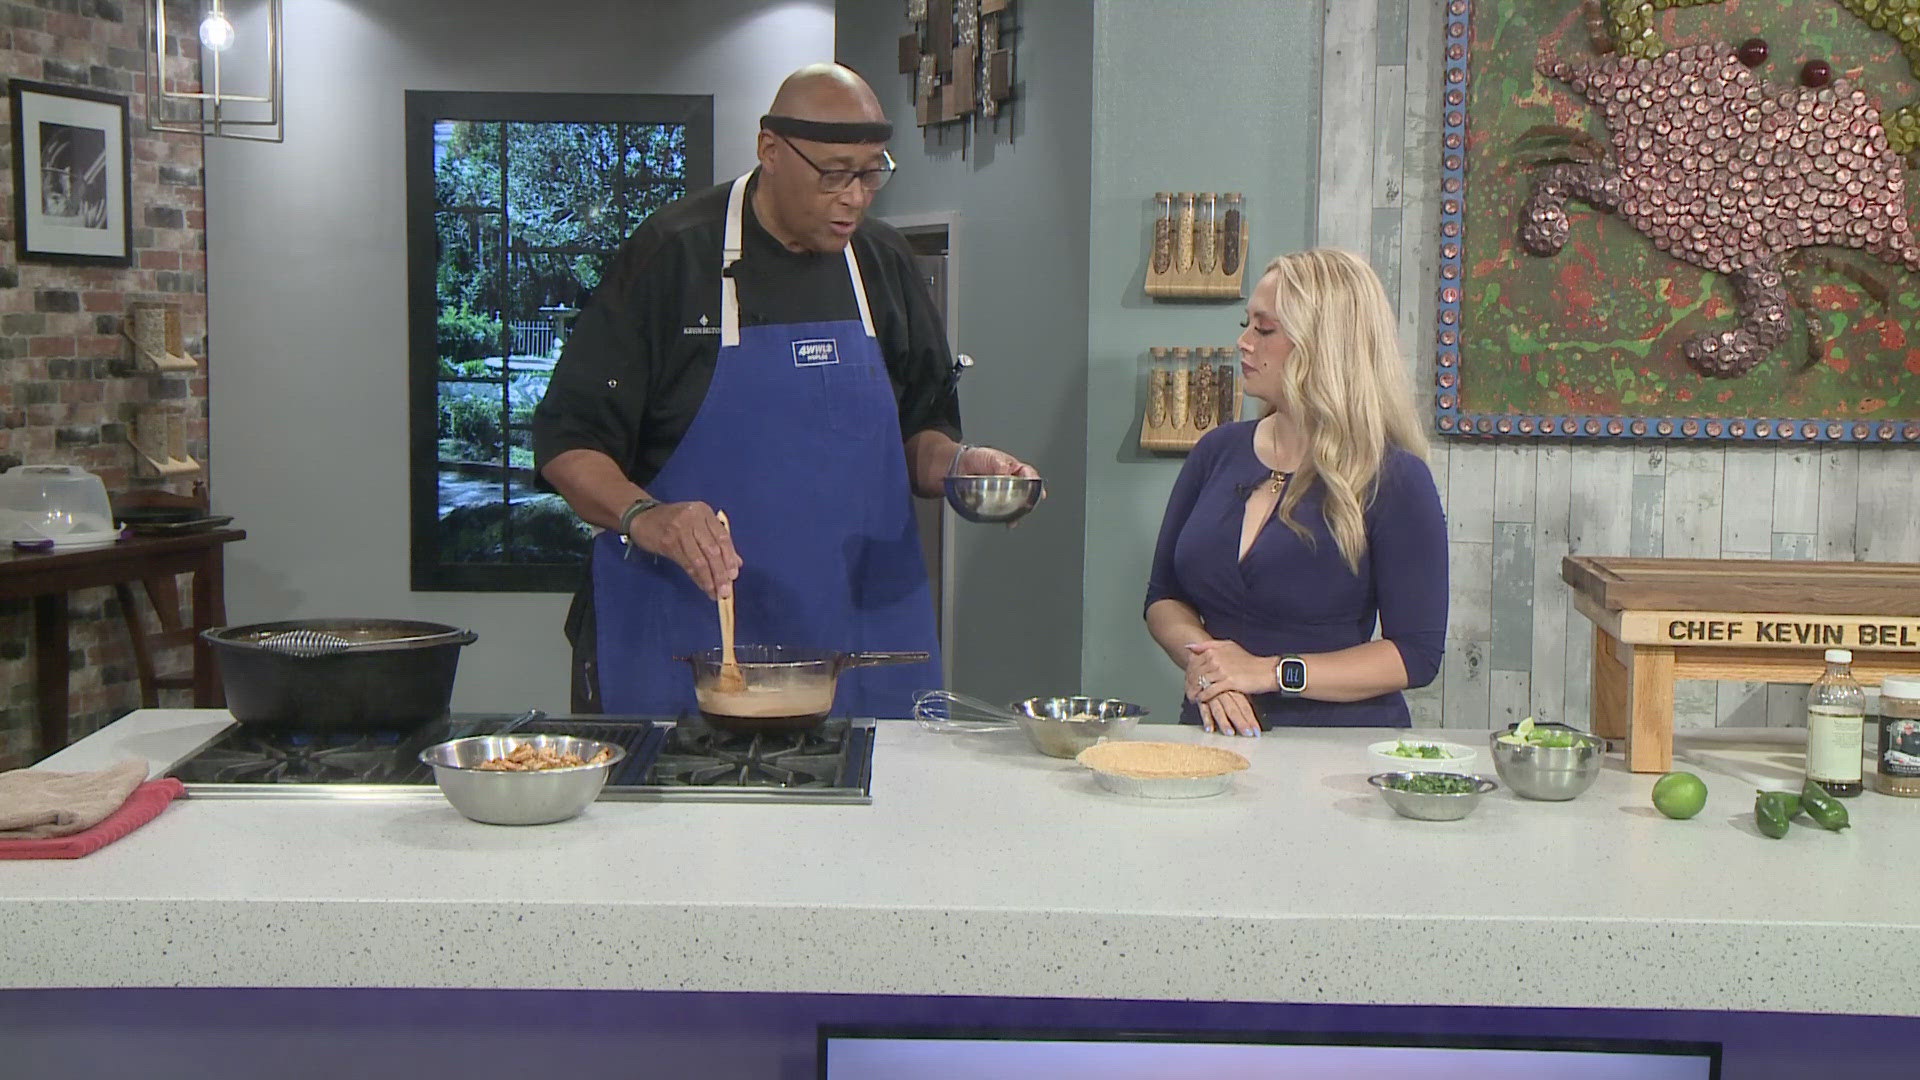 Chef Kevin Belton is in the WWL Louisiana kitchen cooking up a coconut pie and Mexican-inspired dish.